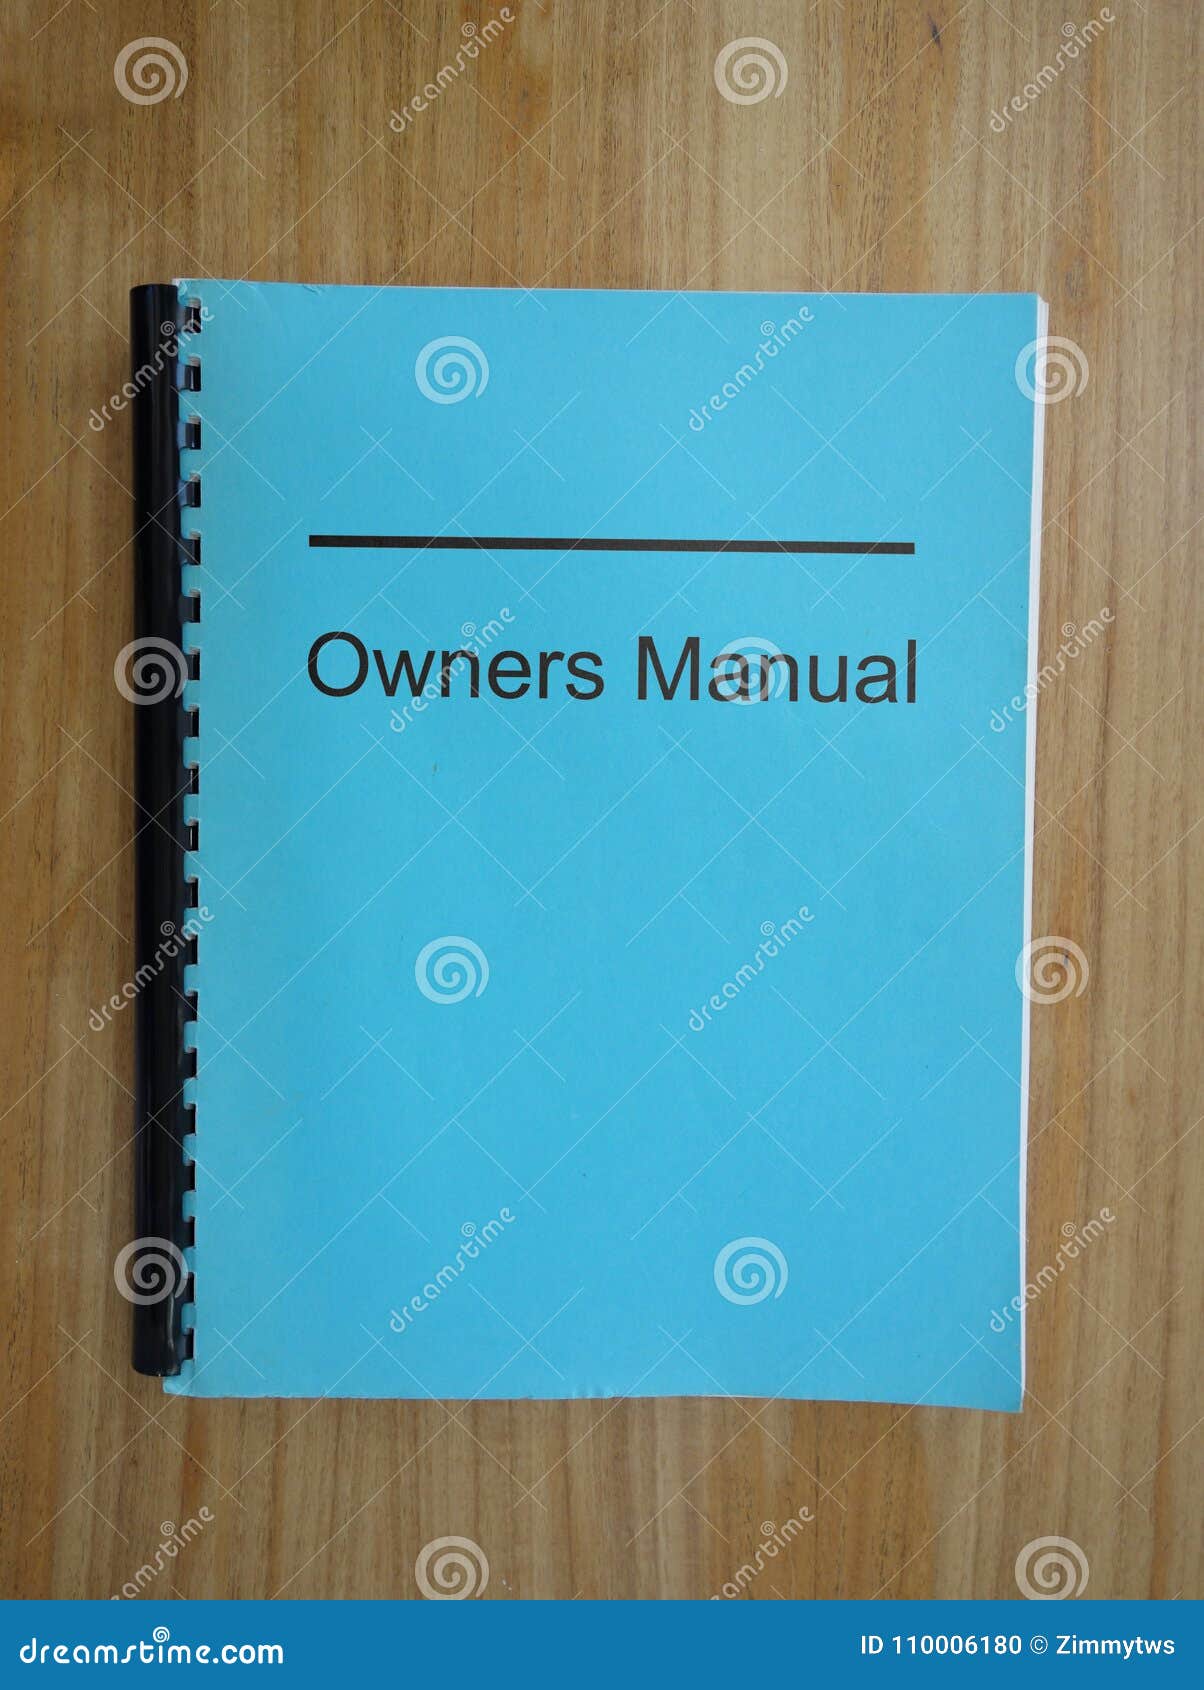 read the manual